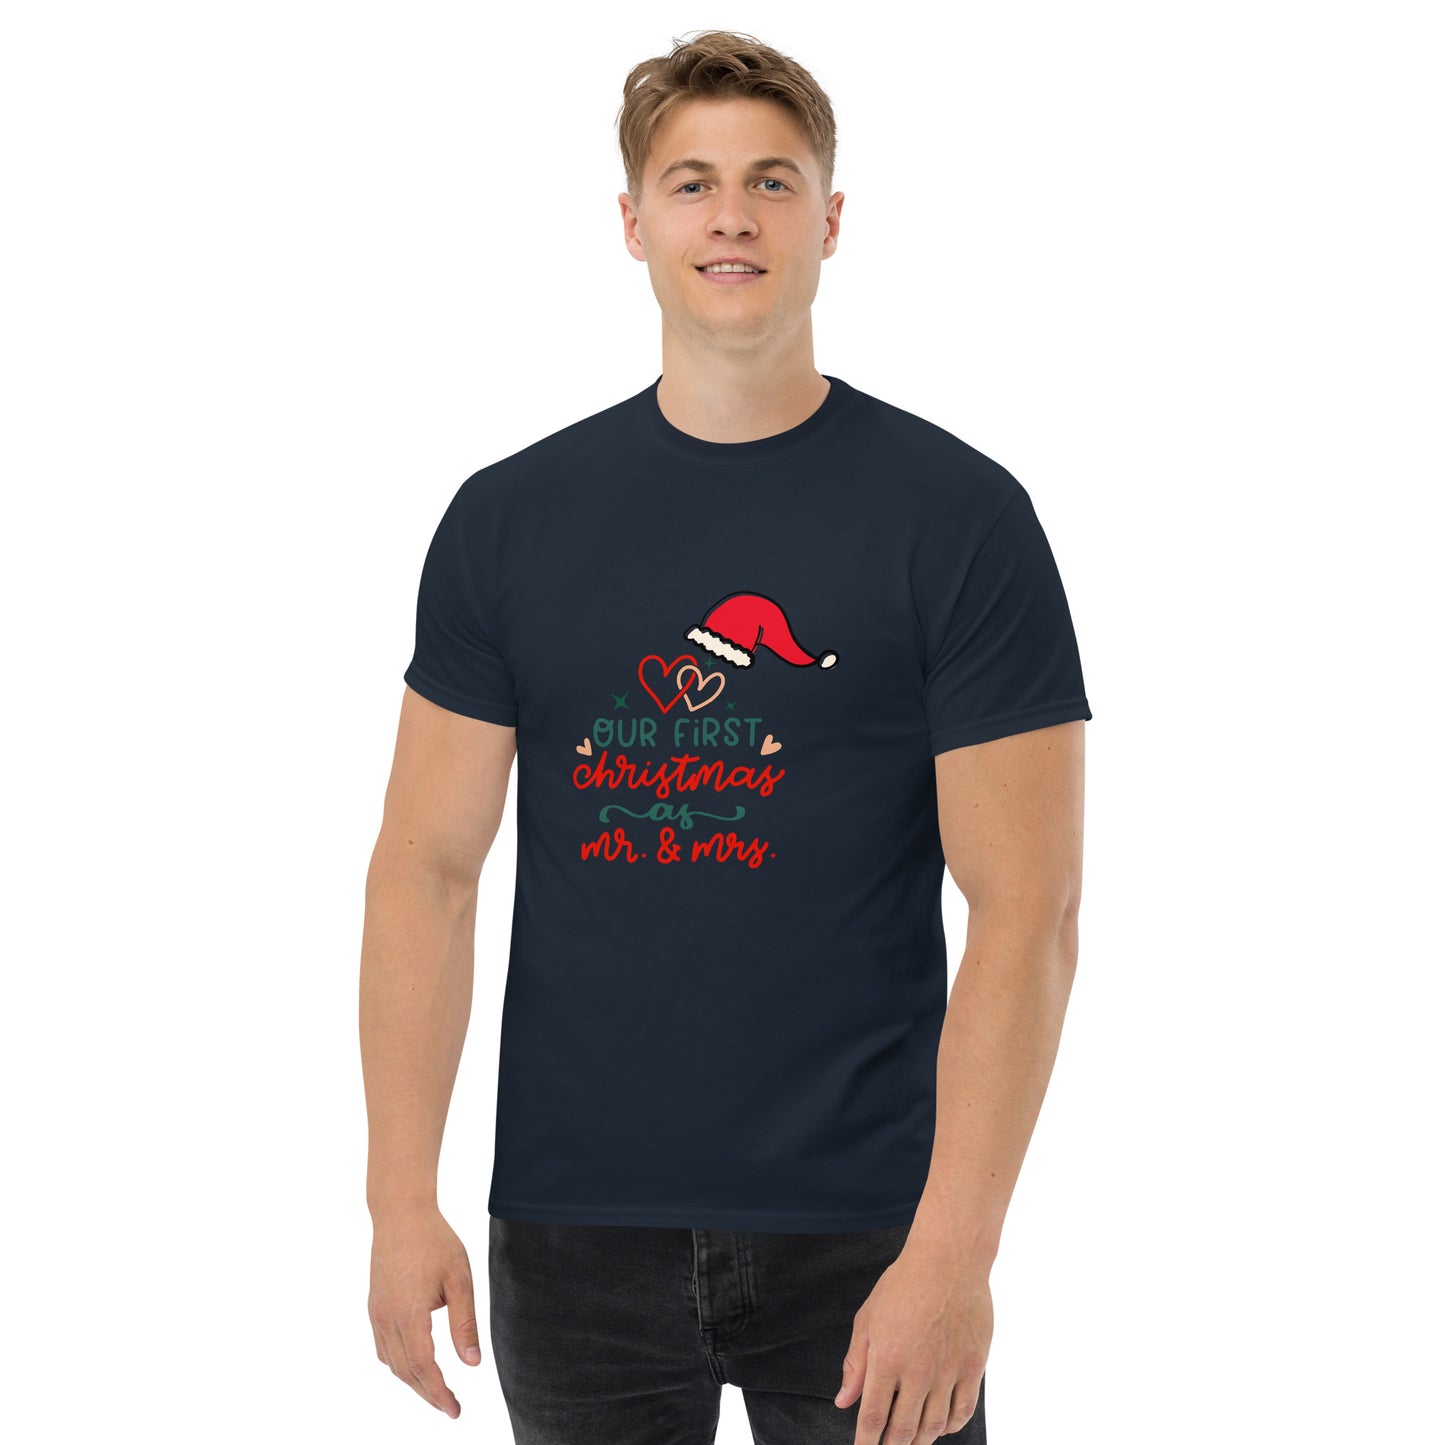 Classic tee | Our First Christmas - Better Outcomes